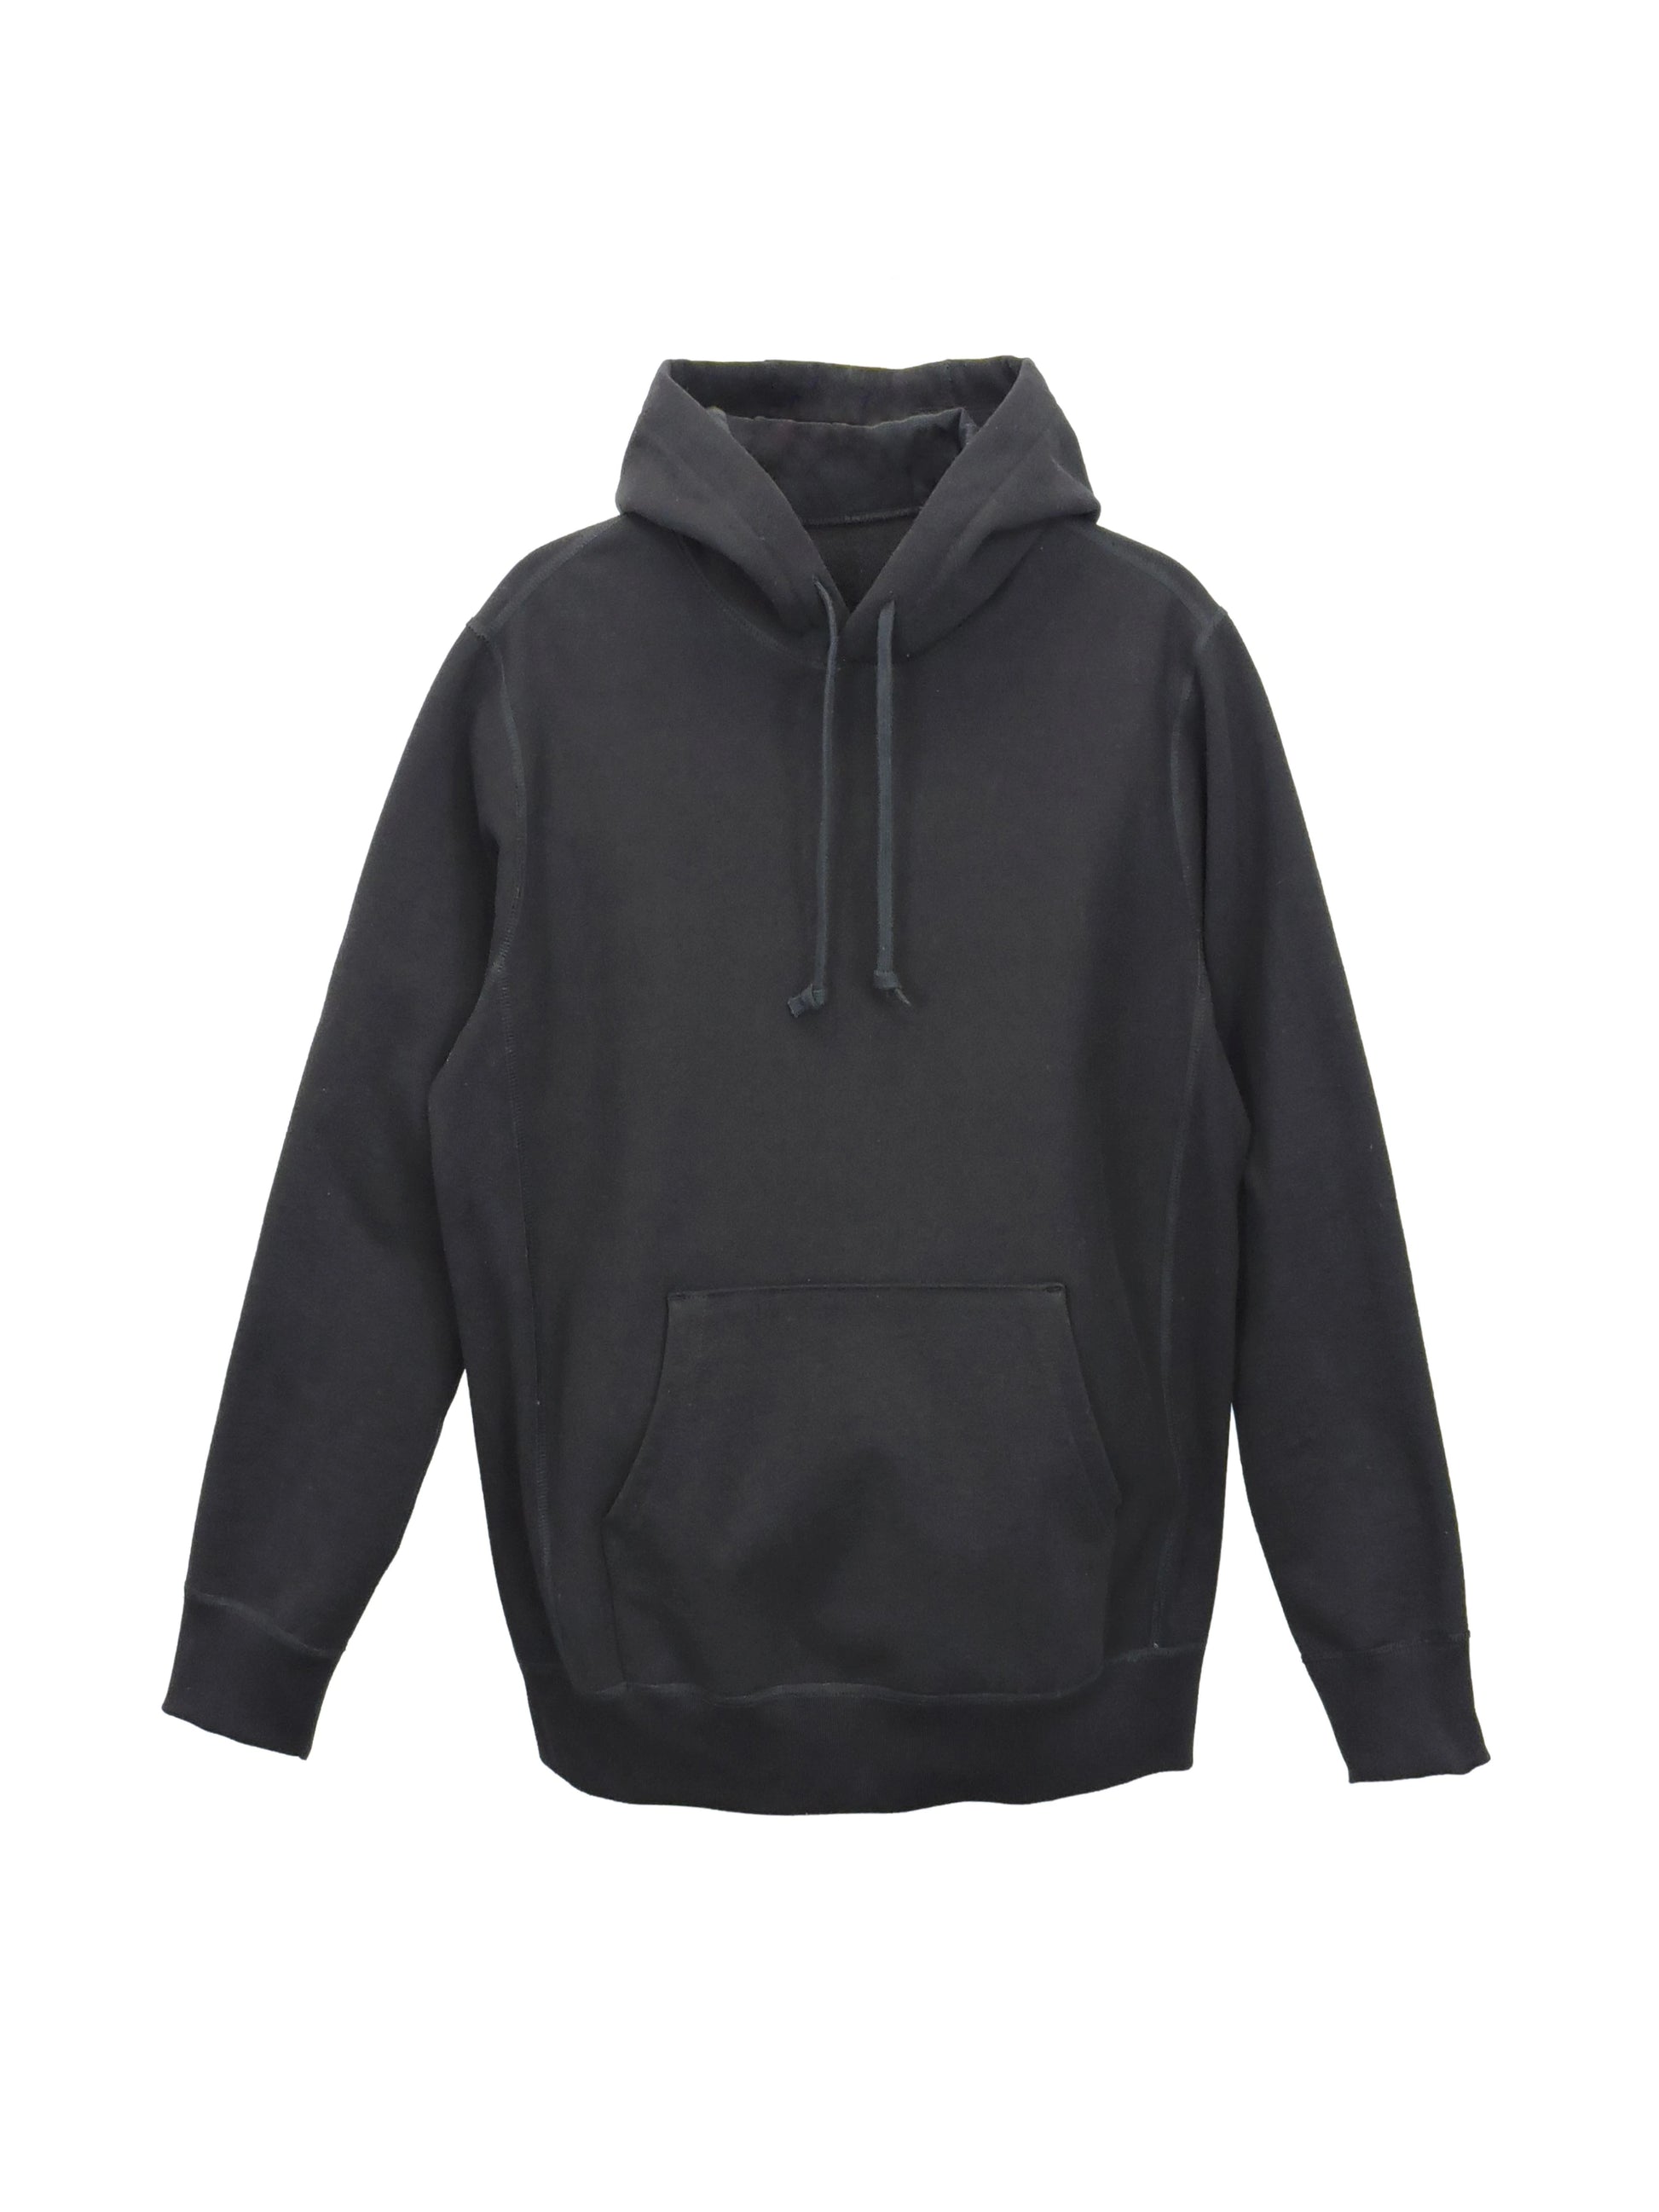 Black French Terry Hoodie | 500 GSM Organic Cotton | Made in